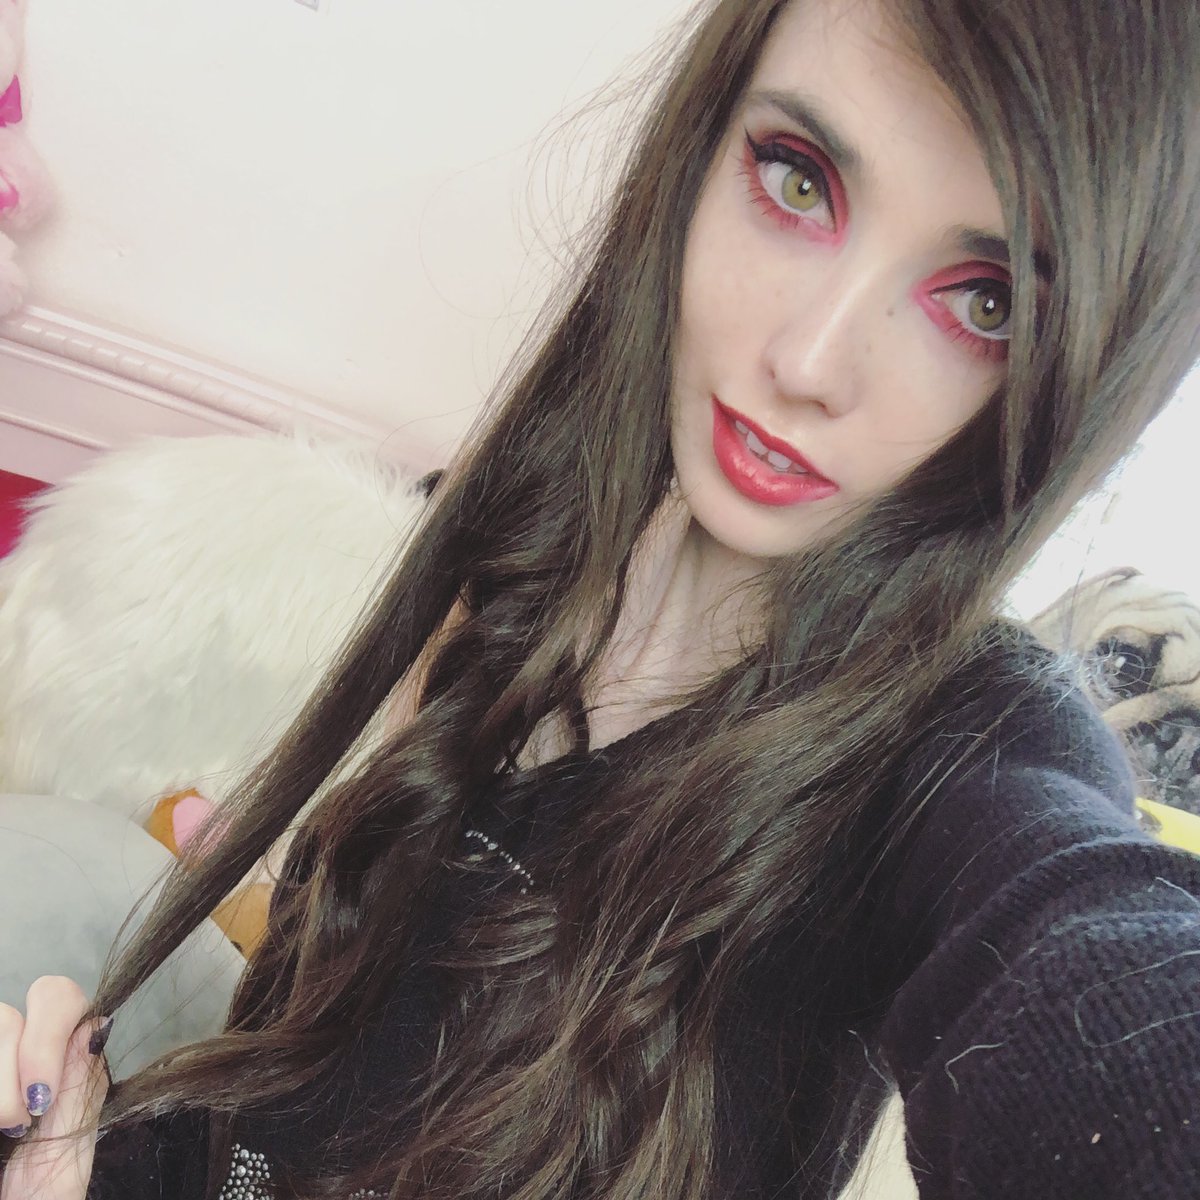 vedlægge Pinpoint bagage Eugenia Cooney on Twitter: "Did my makeup really red today cause I thought  it went good with Halloween 👻🕷💀 https://t.co/oloaFTPe3t" / Twitter